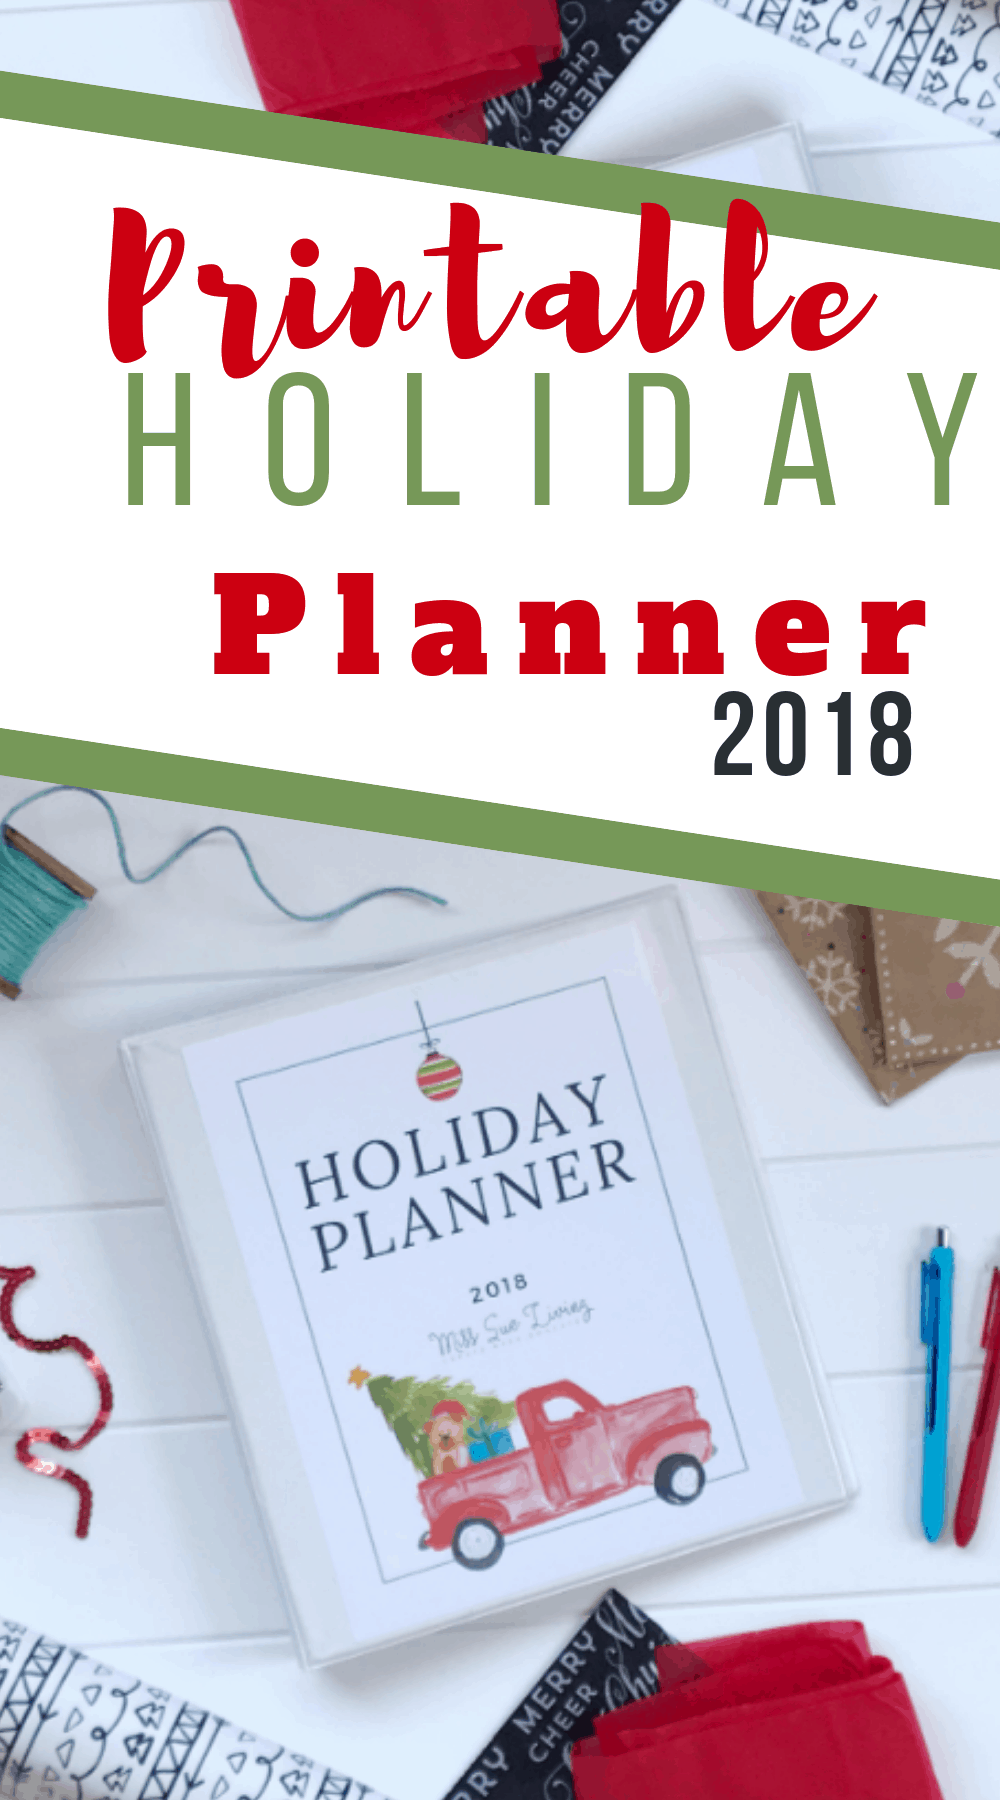 It's Here! An Amazingly Useful 2018 Holiday Planner, 2018 Holiday Planner, holiday planner, holiday planner printables, free holiday planner, holiday planner 2018, christmas planner, holiday organizer, planning for the holidays, #holidayplanner #xmas #christmasplanner #holidays